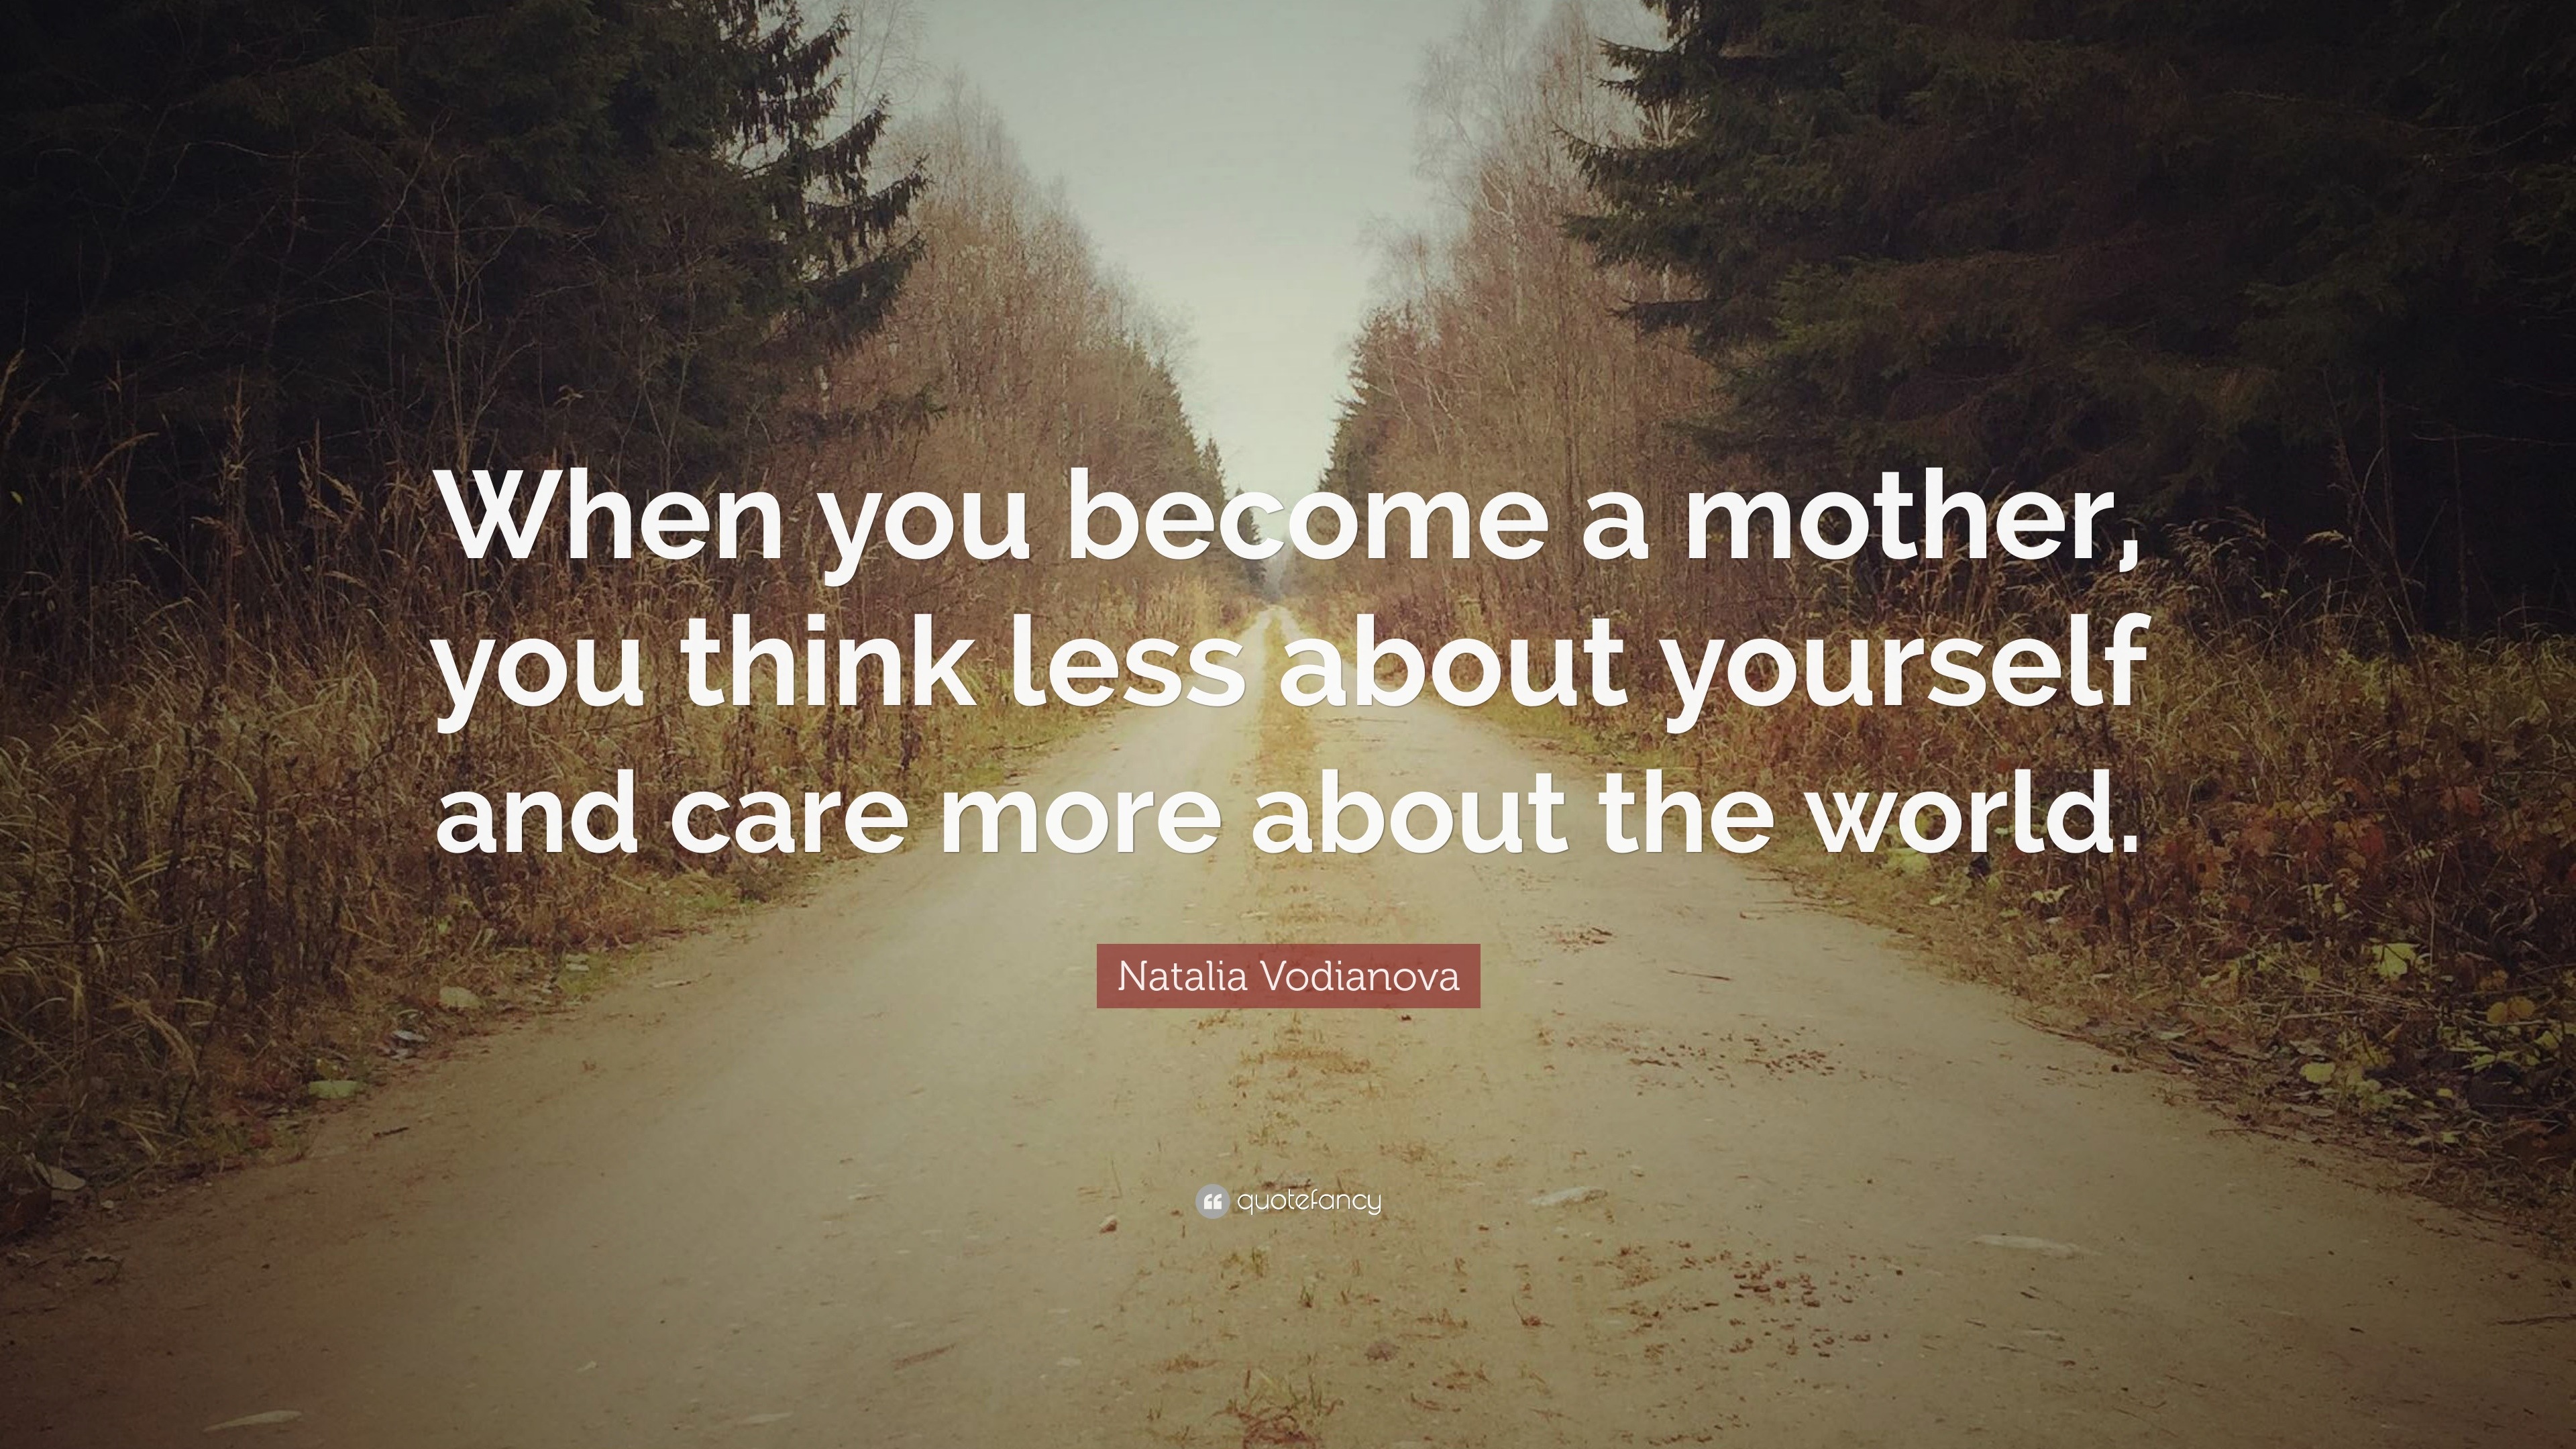 Natalia Vodianova Quote: “When you become a mother, you think less ...